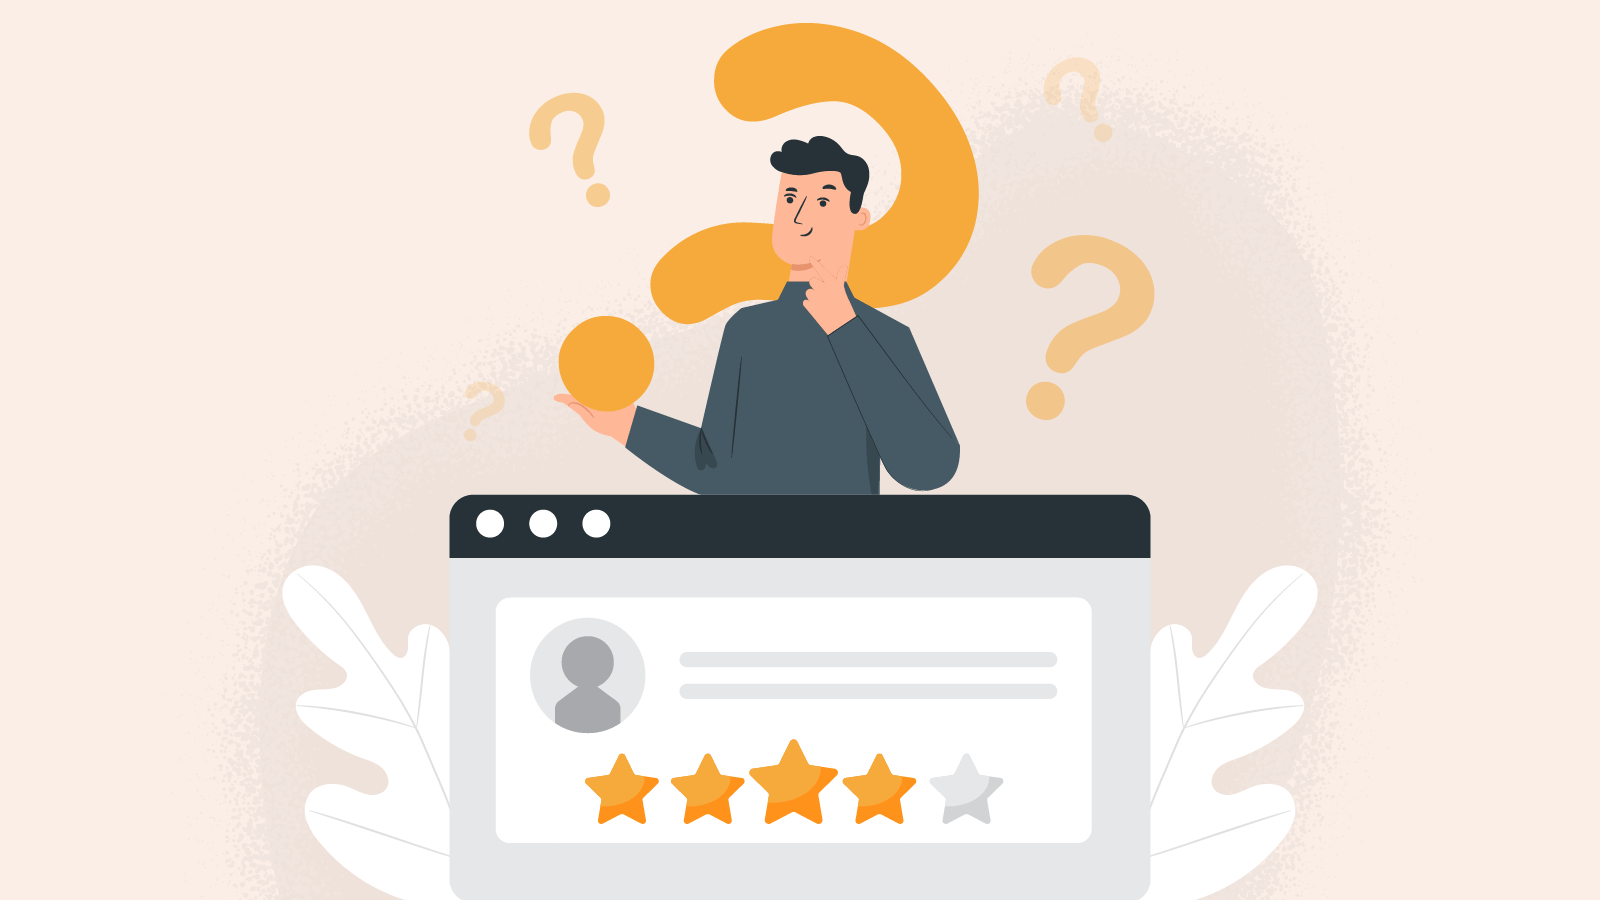 What is the role of reviews